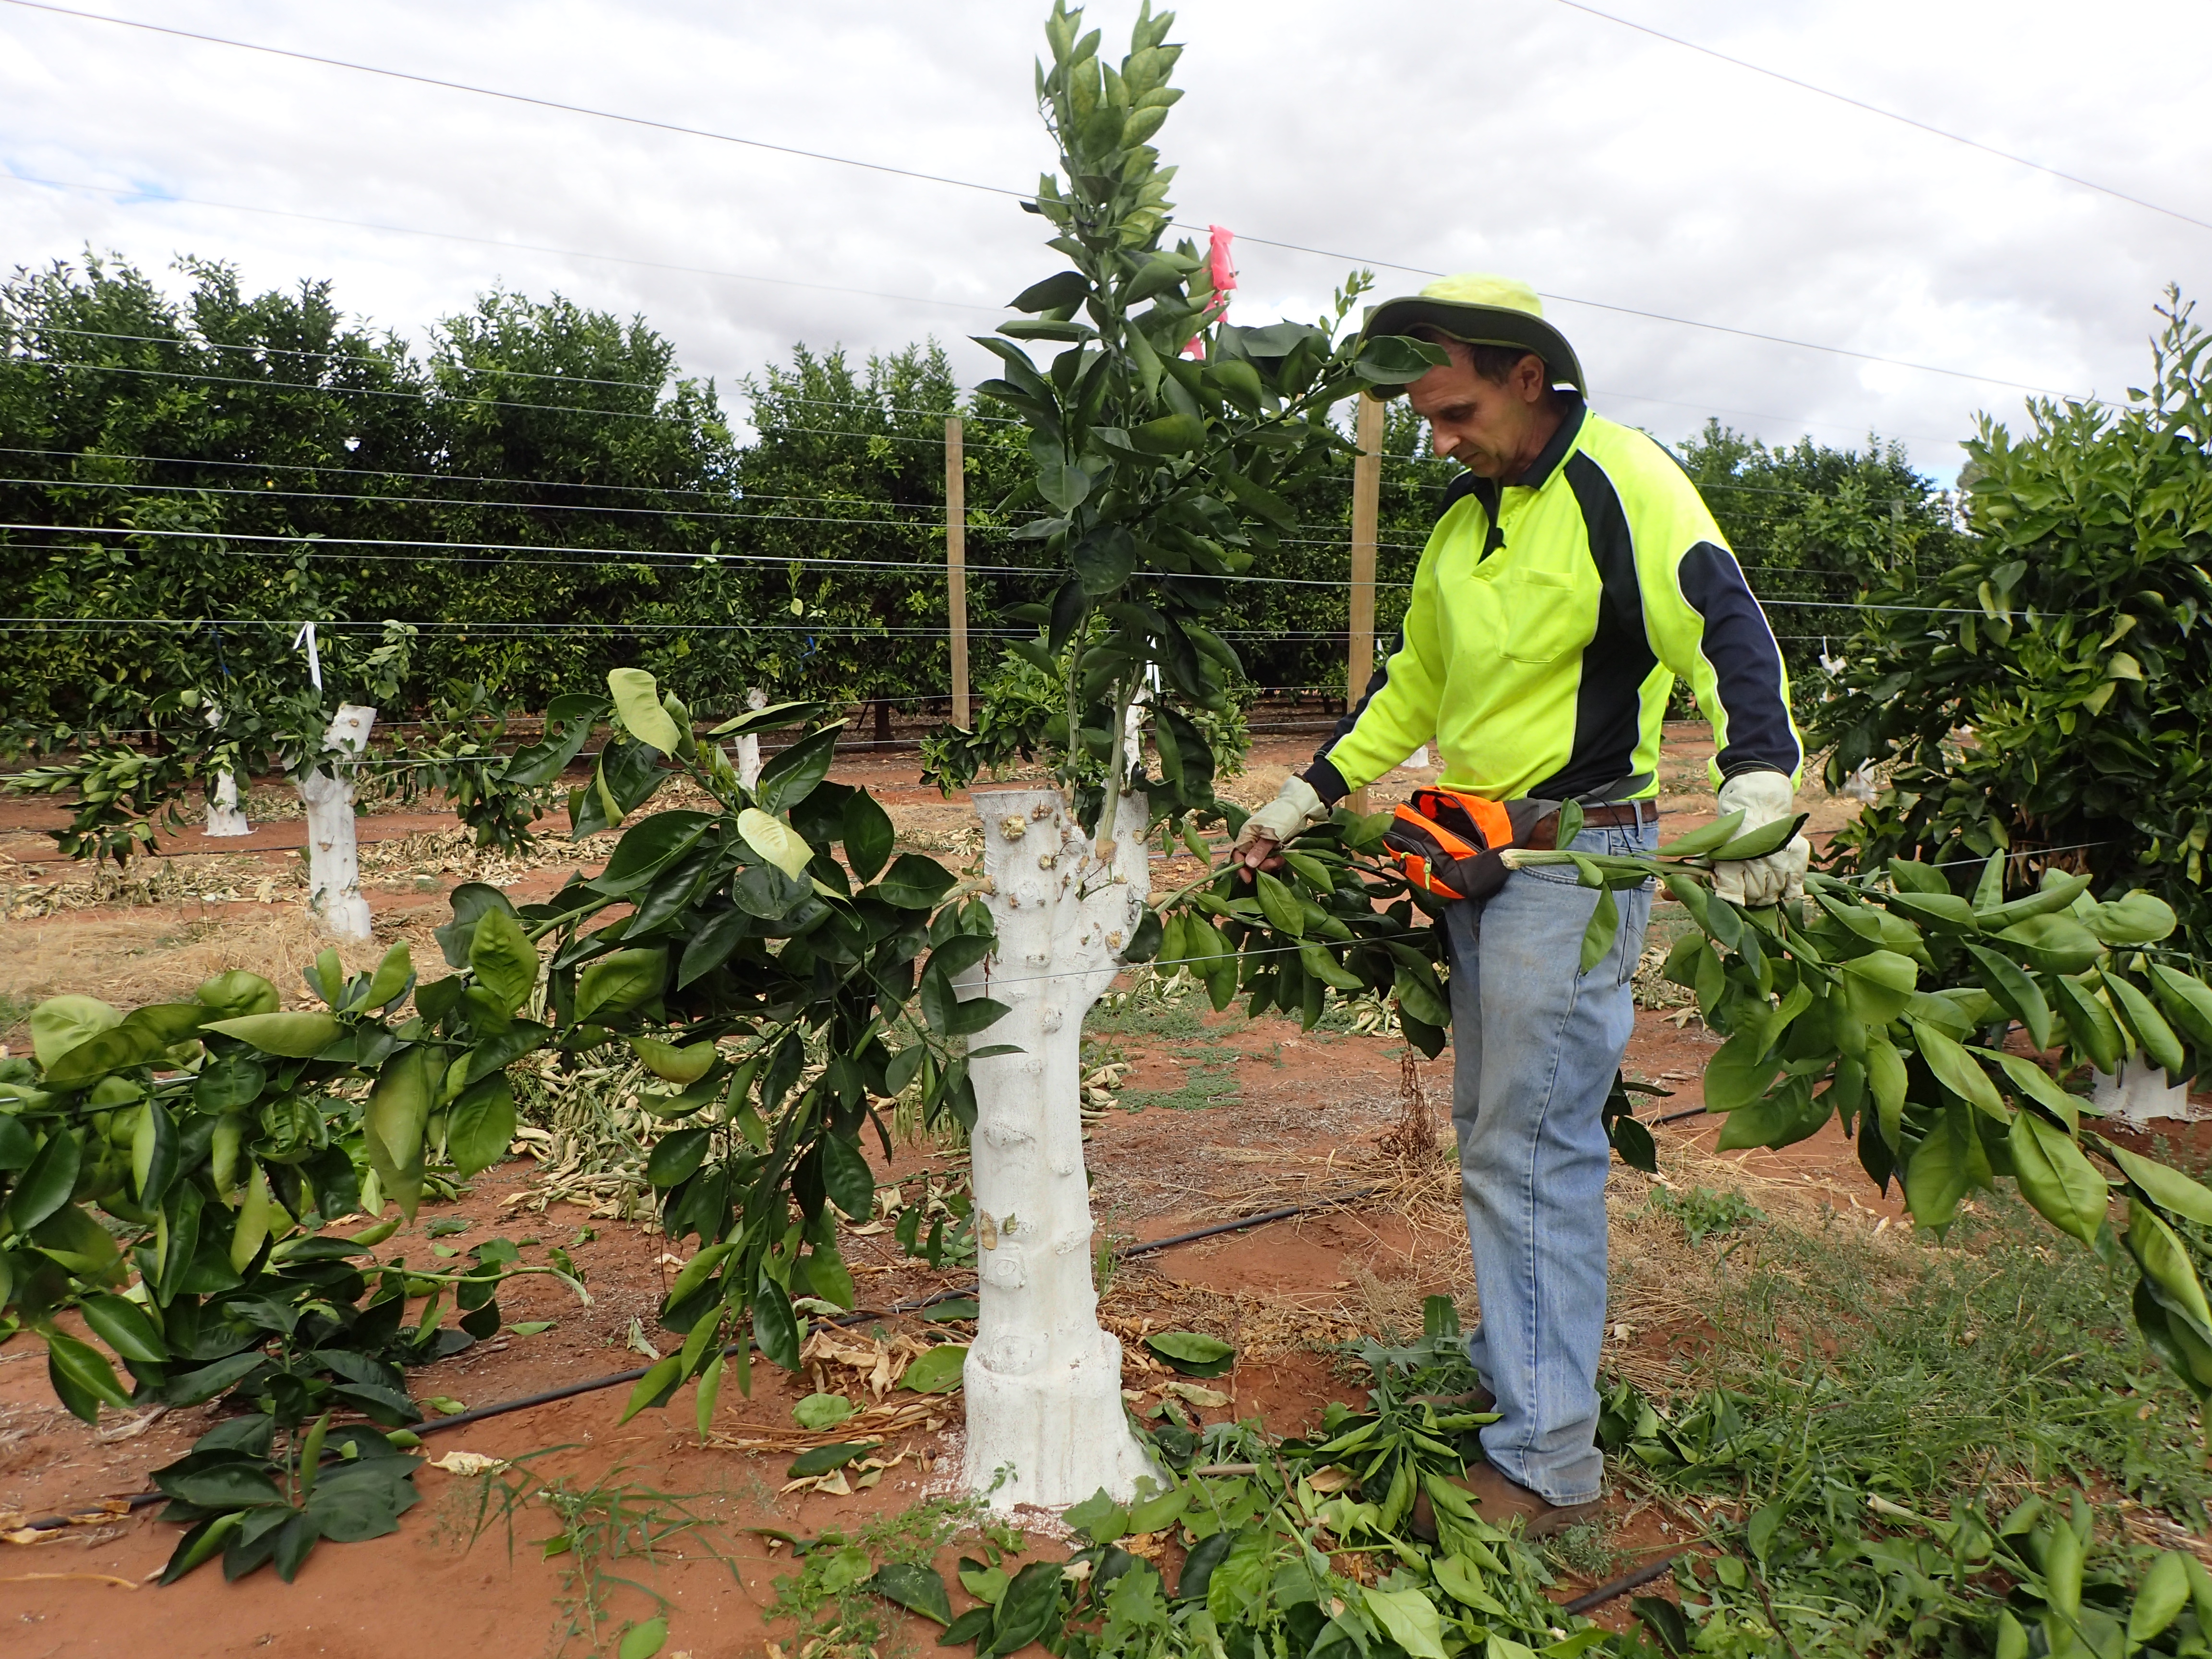 Figure 1. Steven Falivene training branches in an espalier style on the trellis.